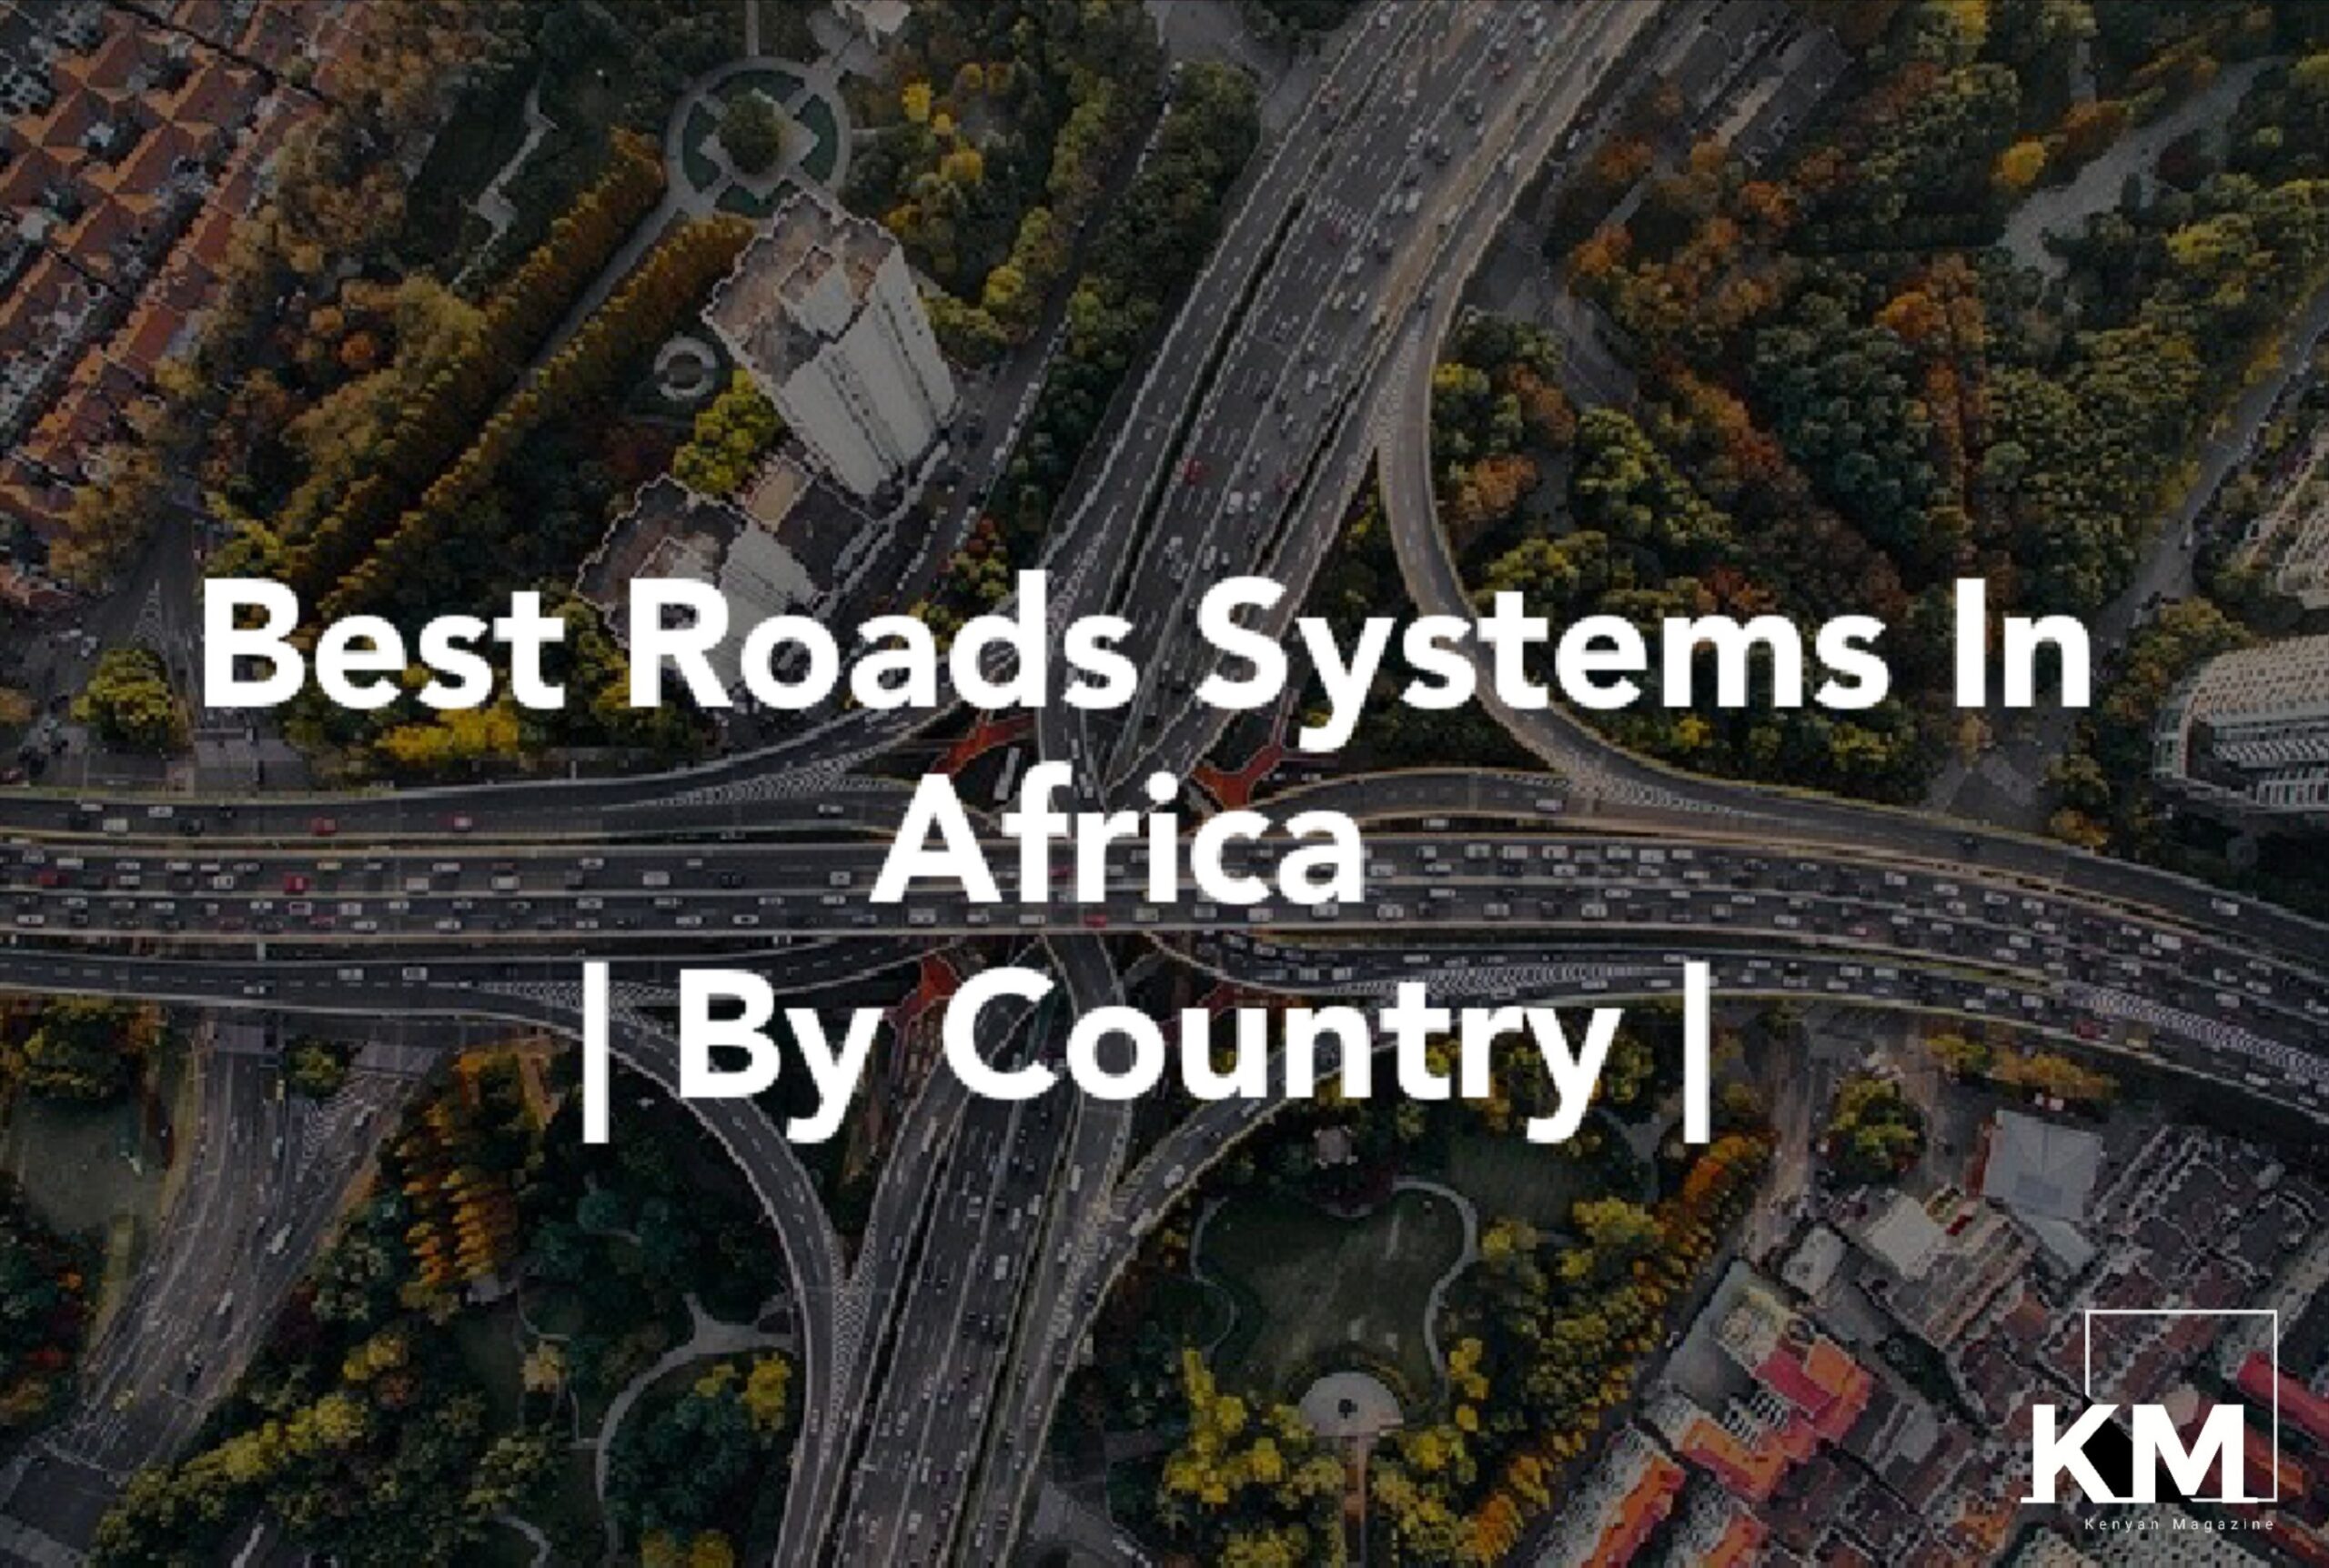 Countries in Africa with quality roads